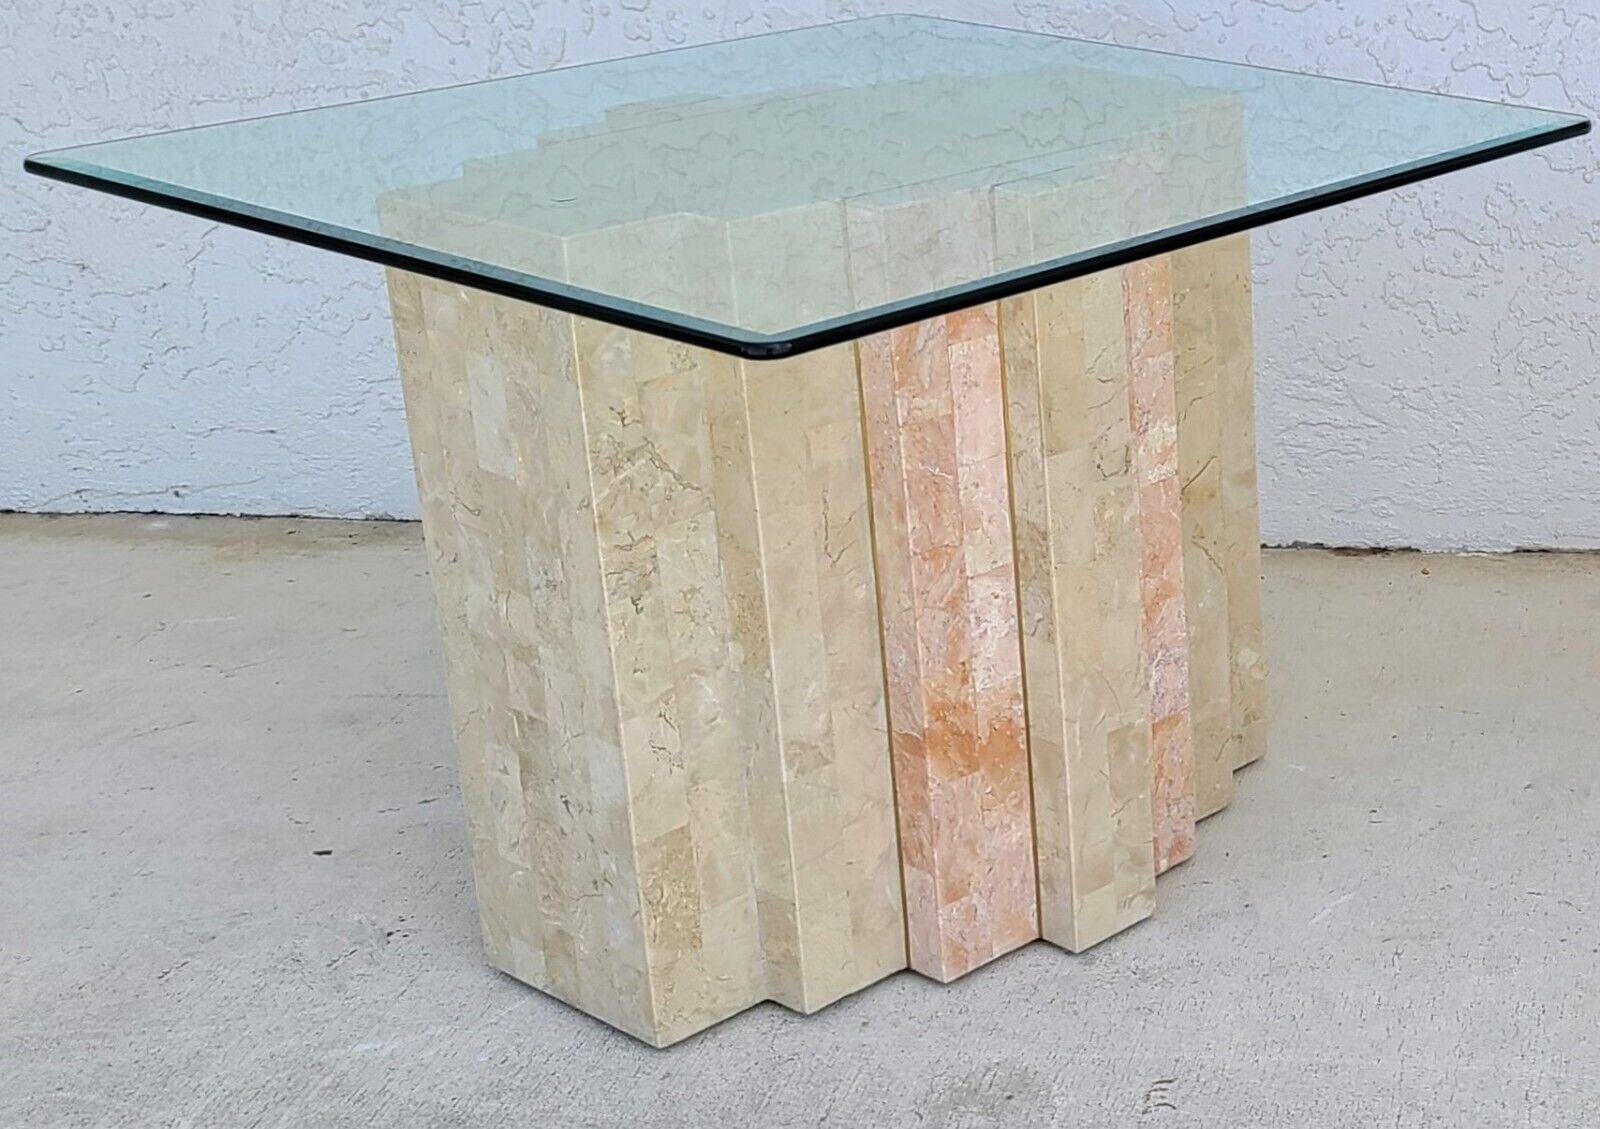 For FULL item description click on CONTINUE READING at the bottom of this page.

Offering One of our recent Palm Beach Estate Fine Furniture acquisitions of a MCM Maitland Smith style 2 tone tessellated stone brass inlay side end table

Approximate